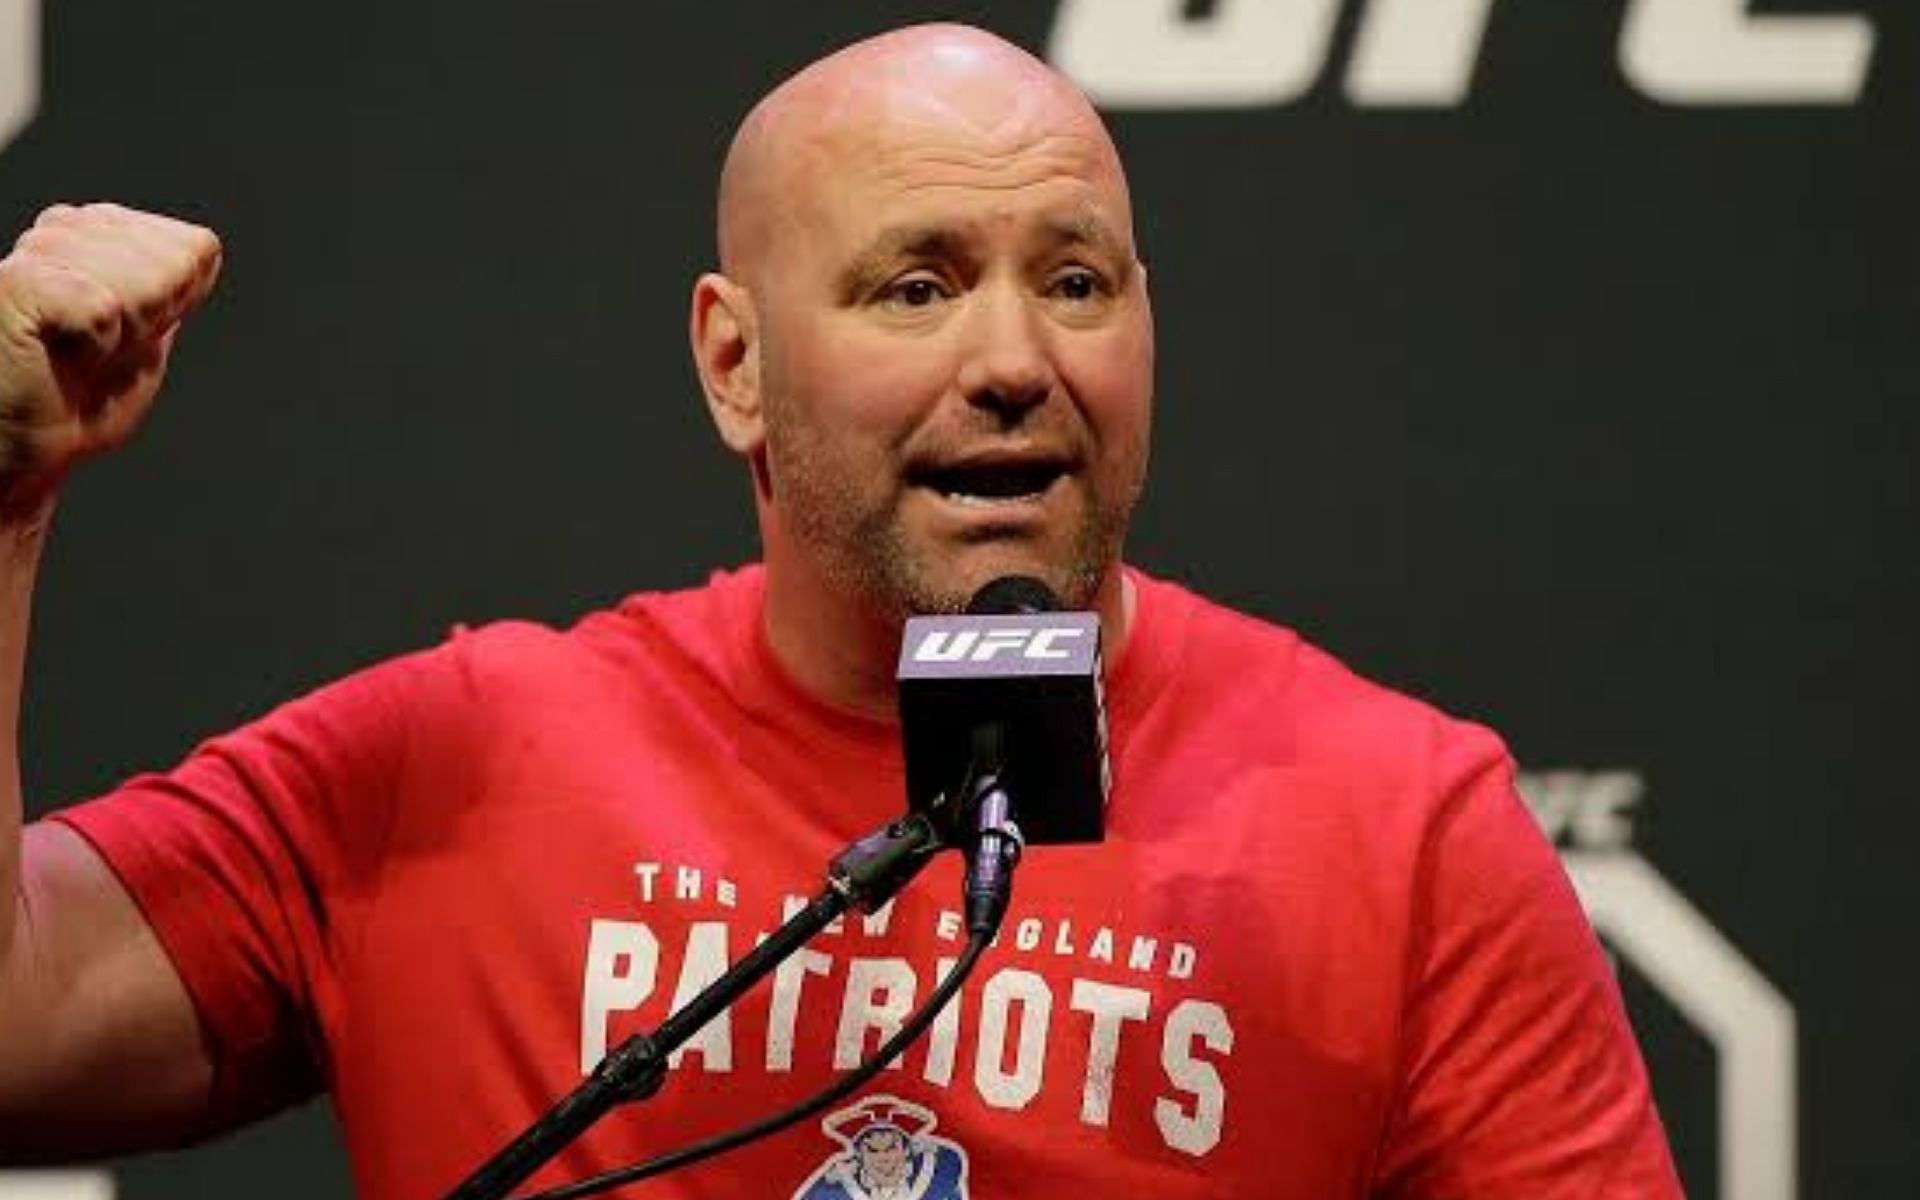 Ufc News What Are The New Vaccination Rules The Ufc Will Have To Follow And What Did Dana White 